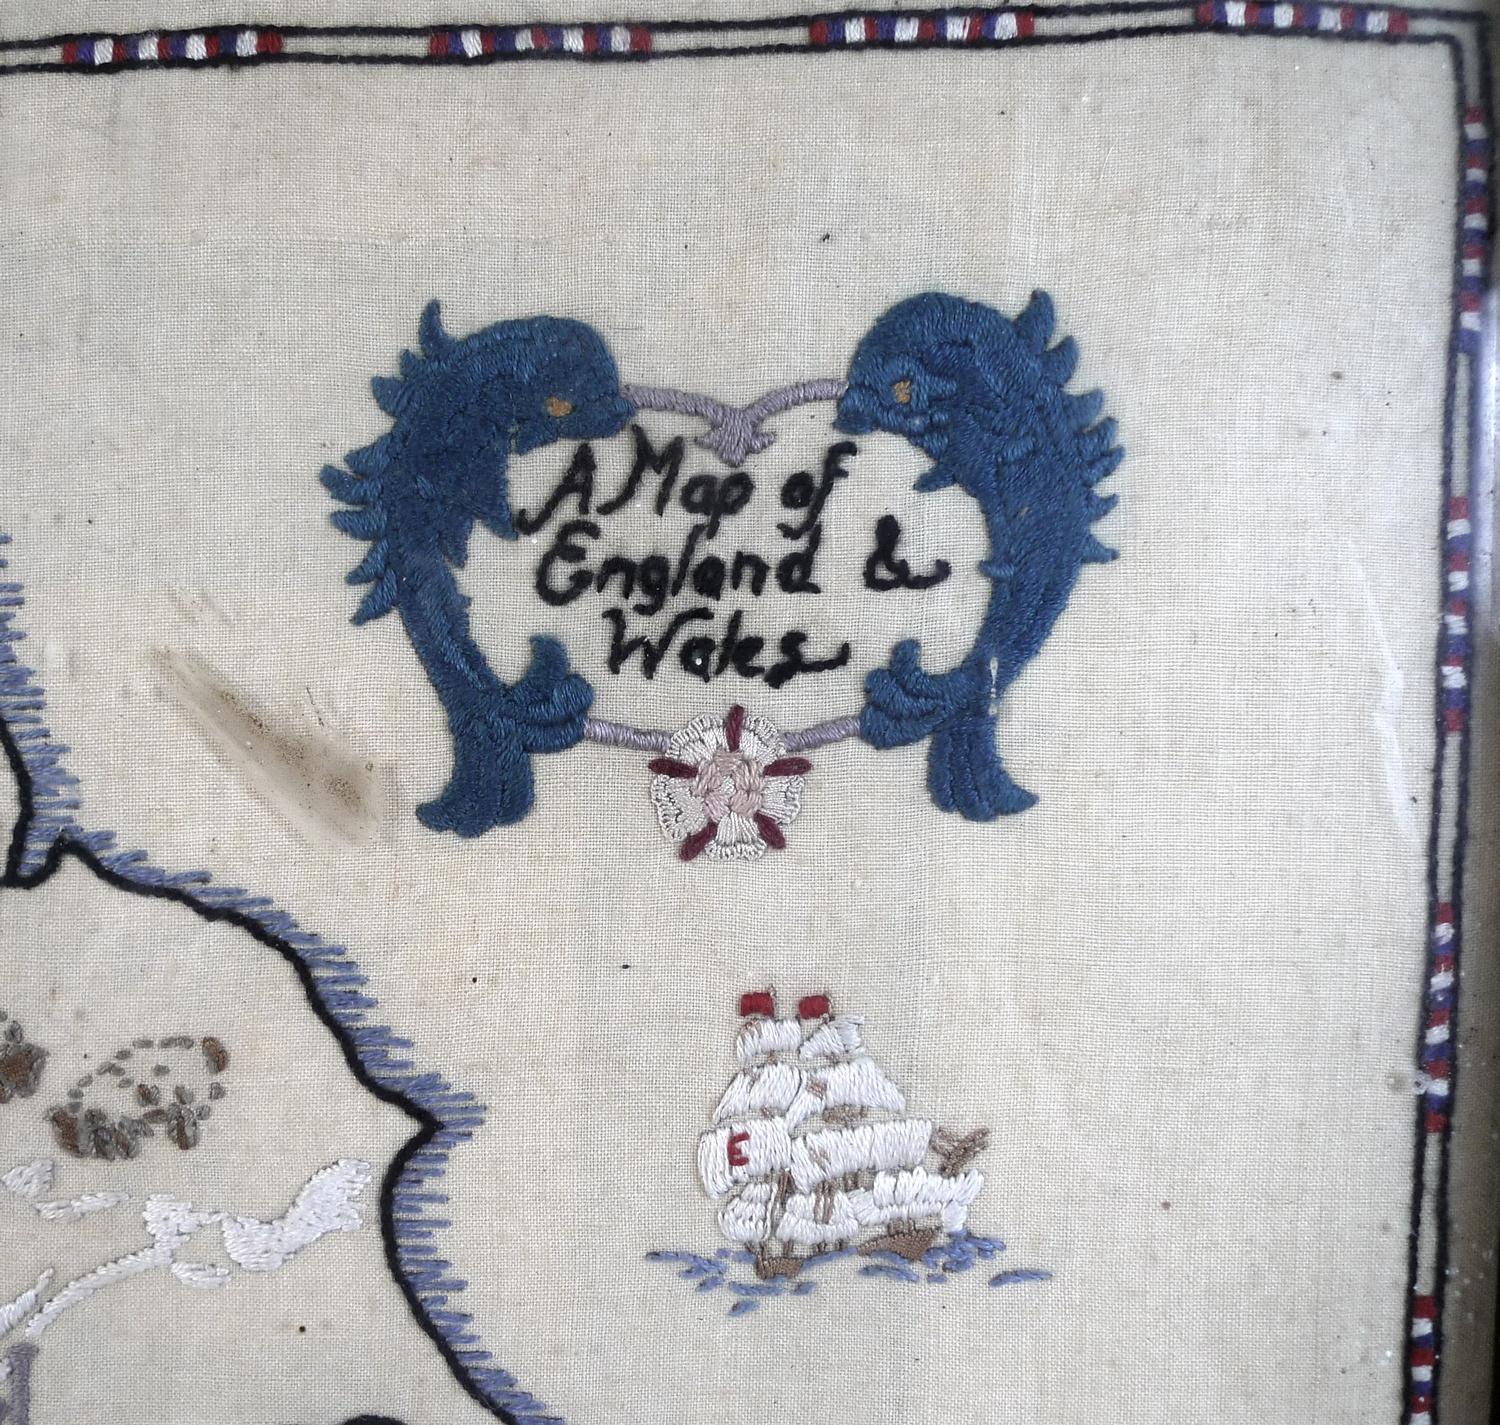 A vintage embroidered 'Map of England & Wales', showing the individual counties and the local - Image 3 of 5